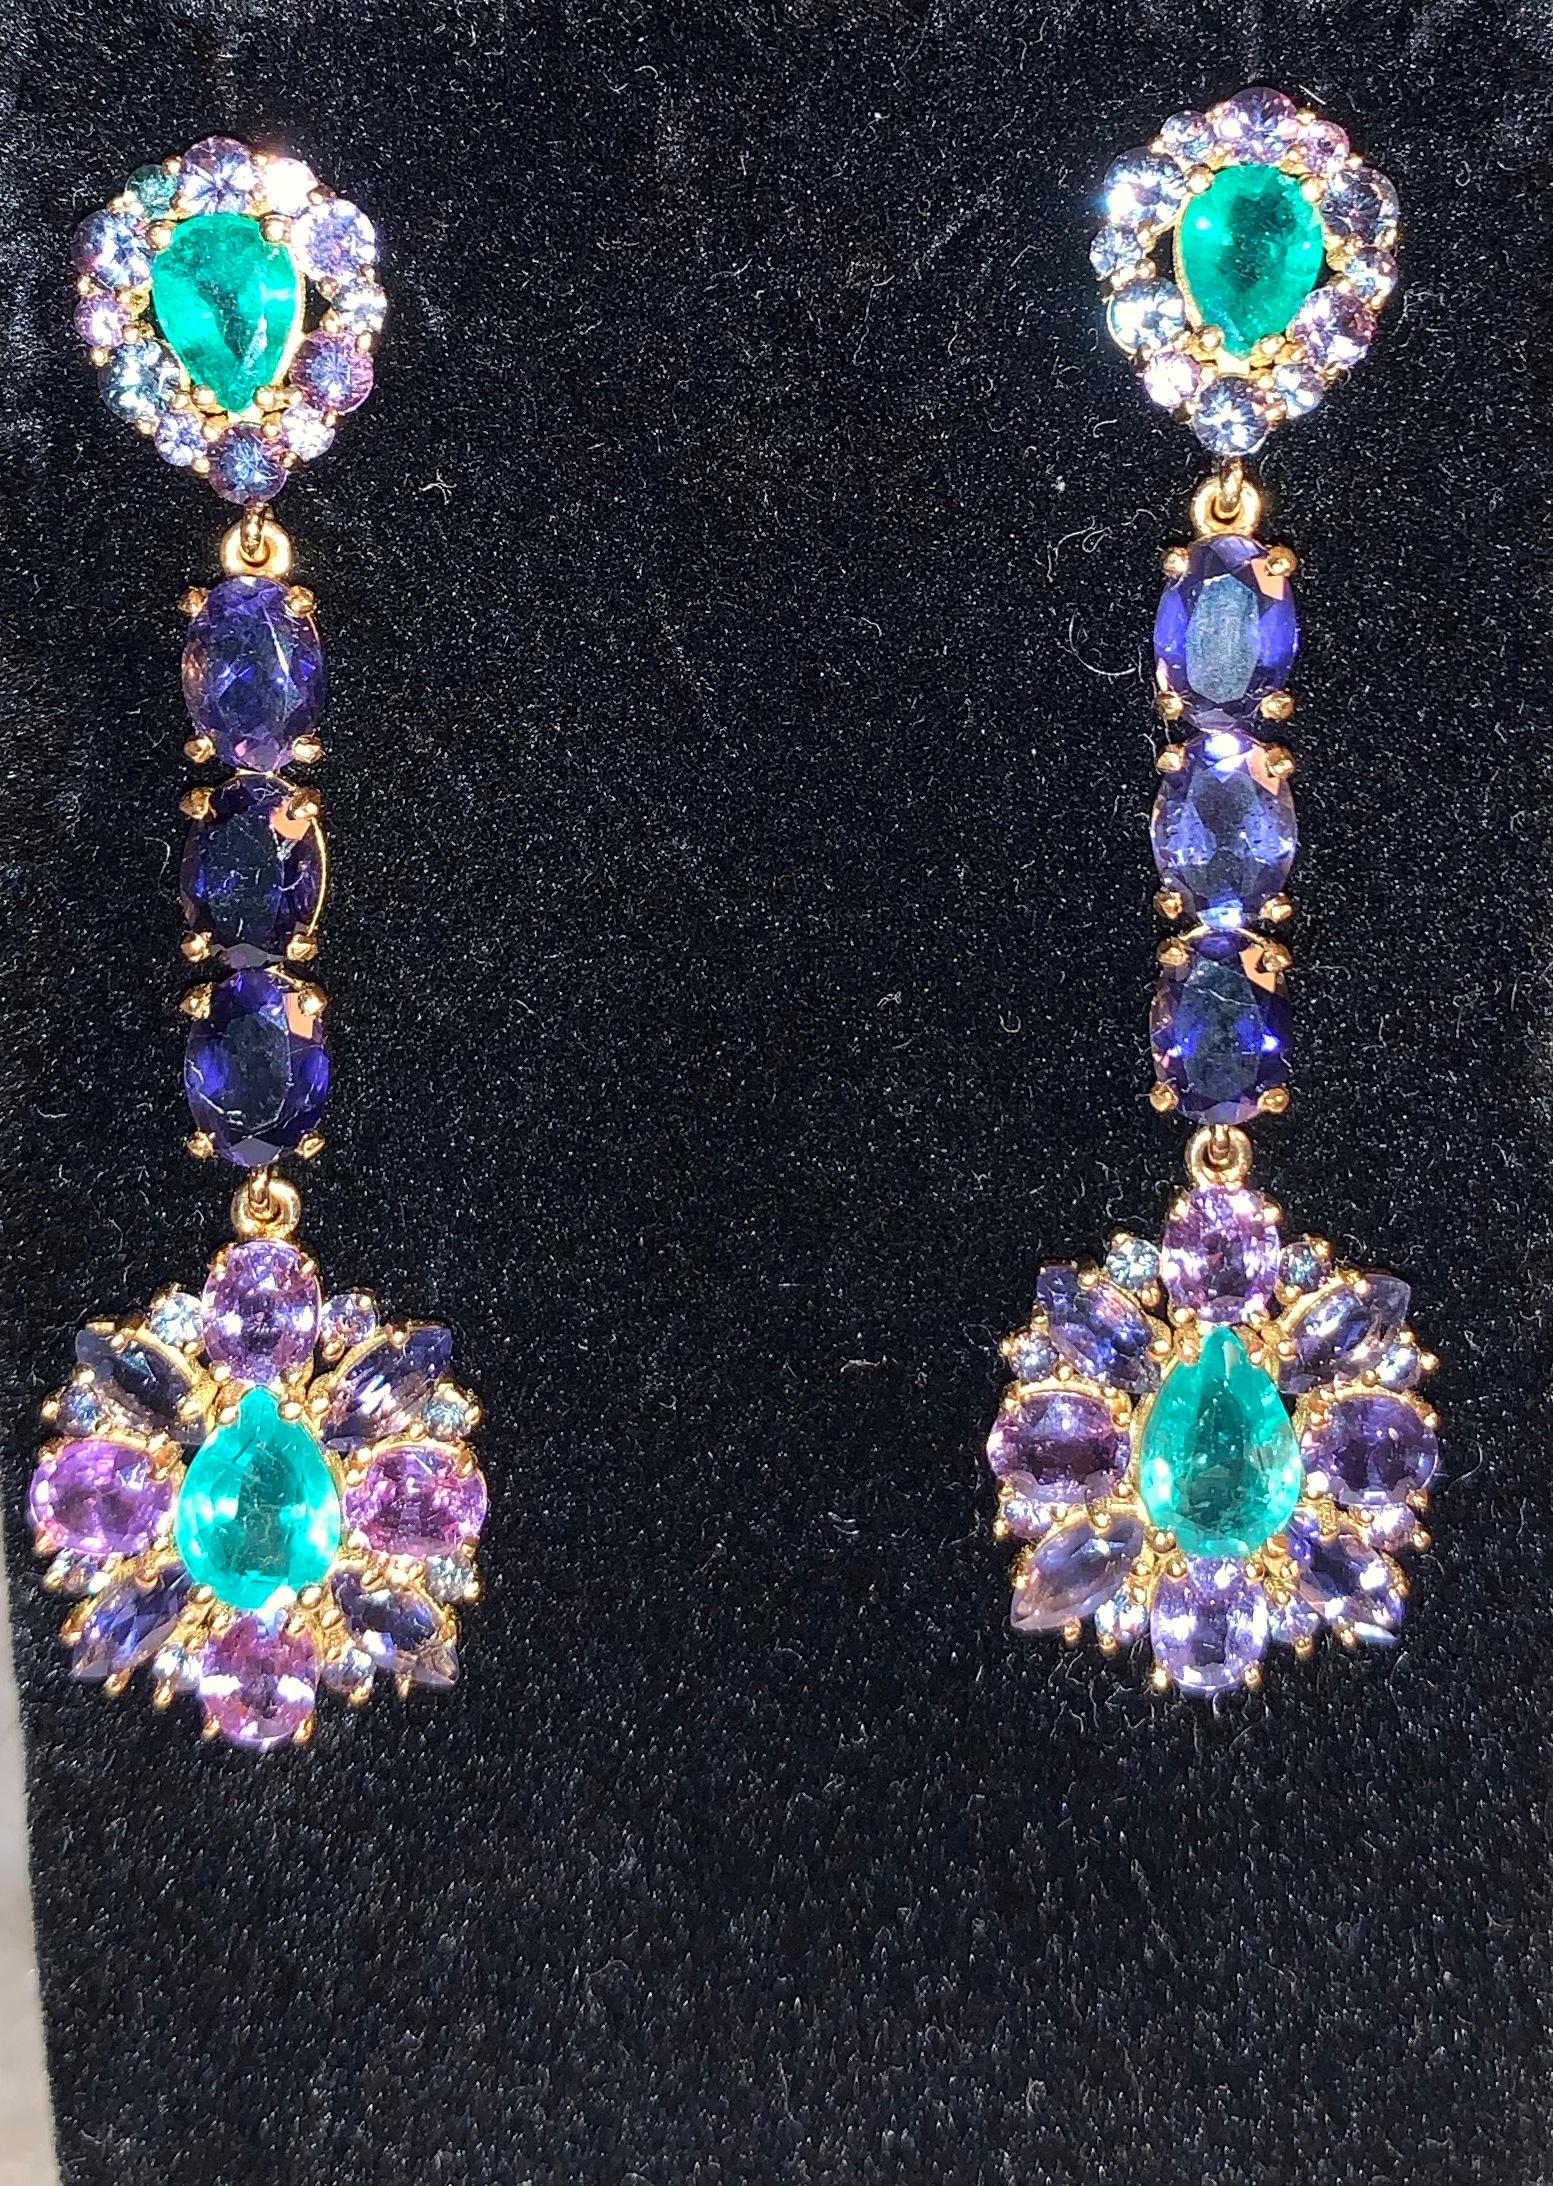 Sabrina Balsky Jewelry
One of a Kind Zambian Blue Green Emerald Earrings bordered with 28 2mm Alexandrites and 12 3mm Alexandrites and  Purple Sapphires, joined with Faceted Iolites set in 18kt yellow gold.
Very Rare Russian Alexandrite stones